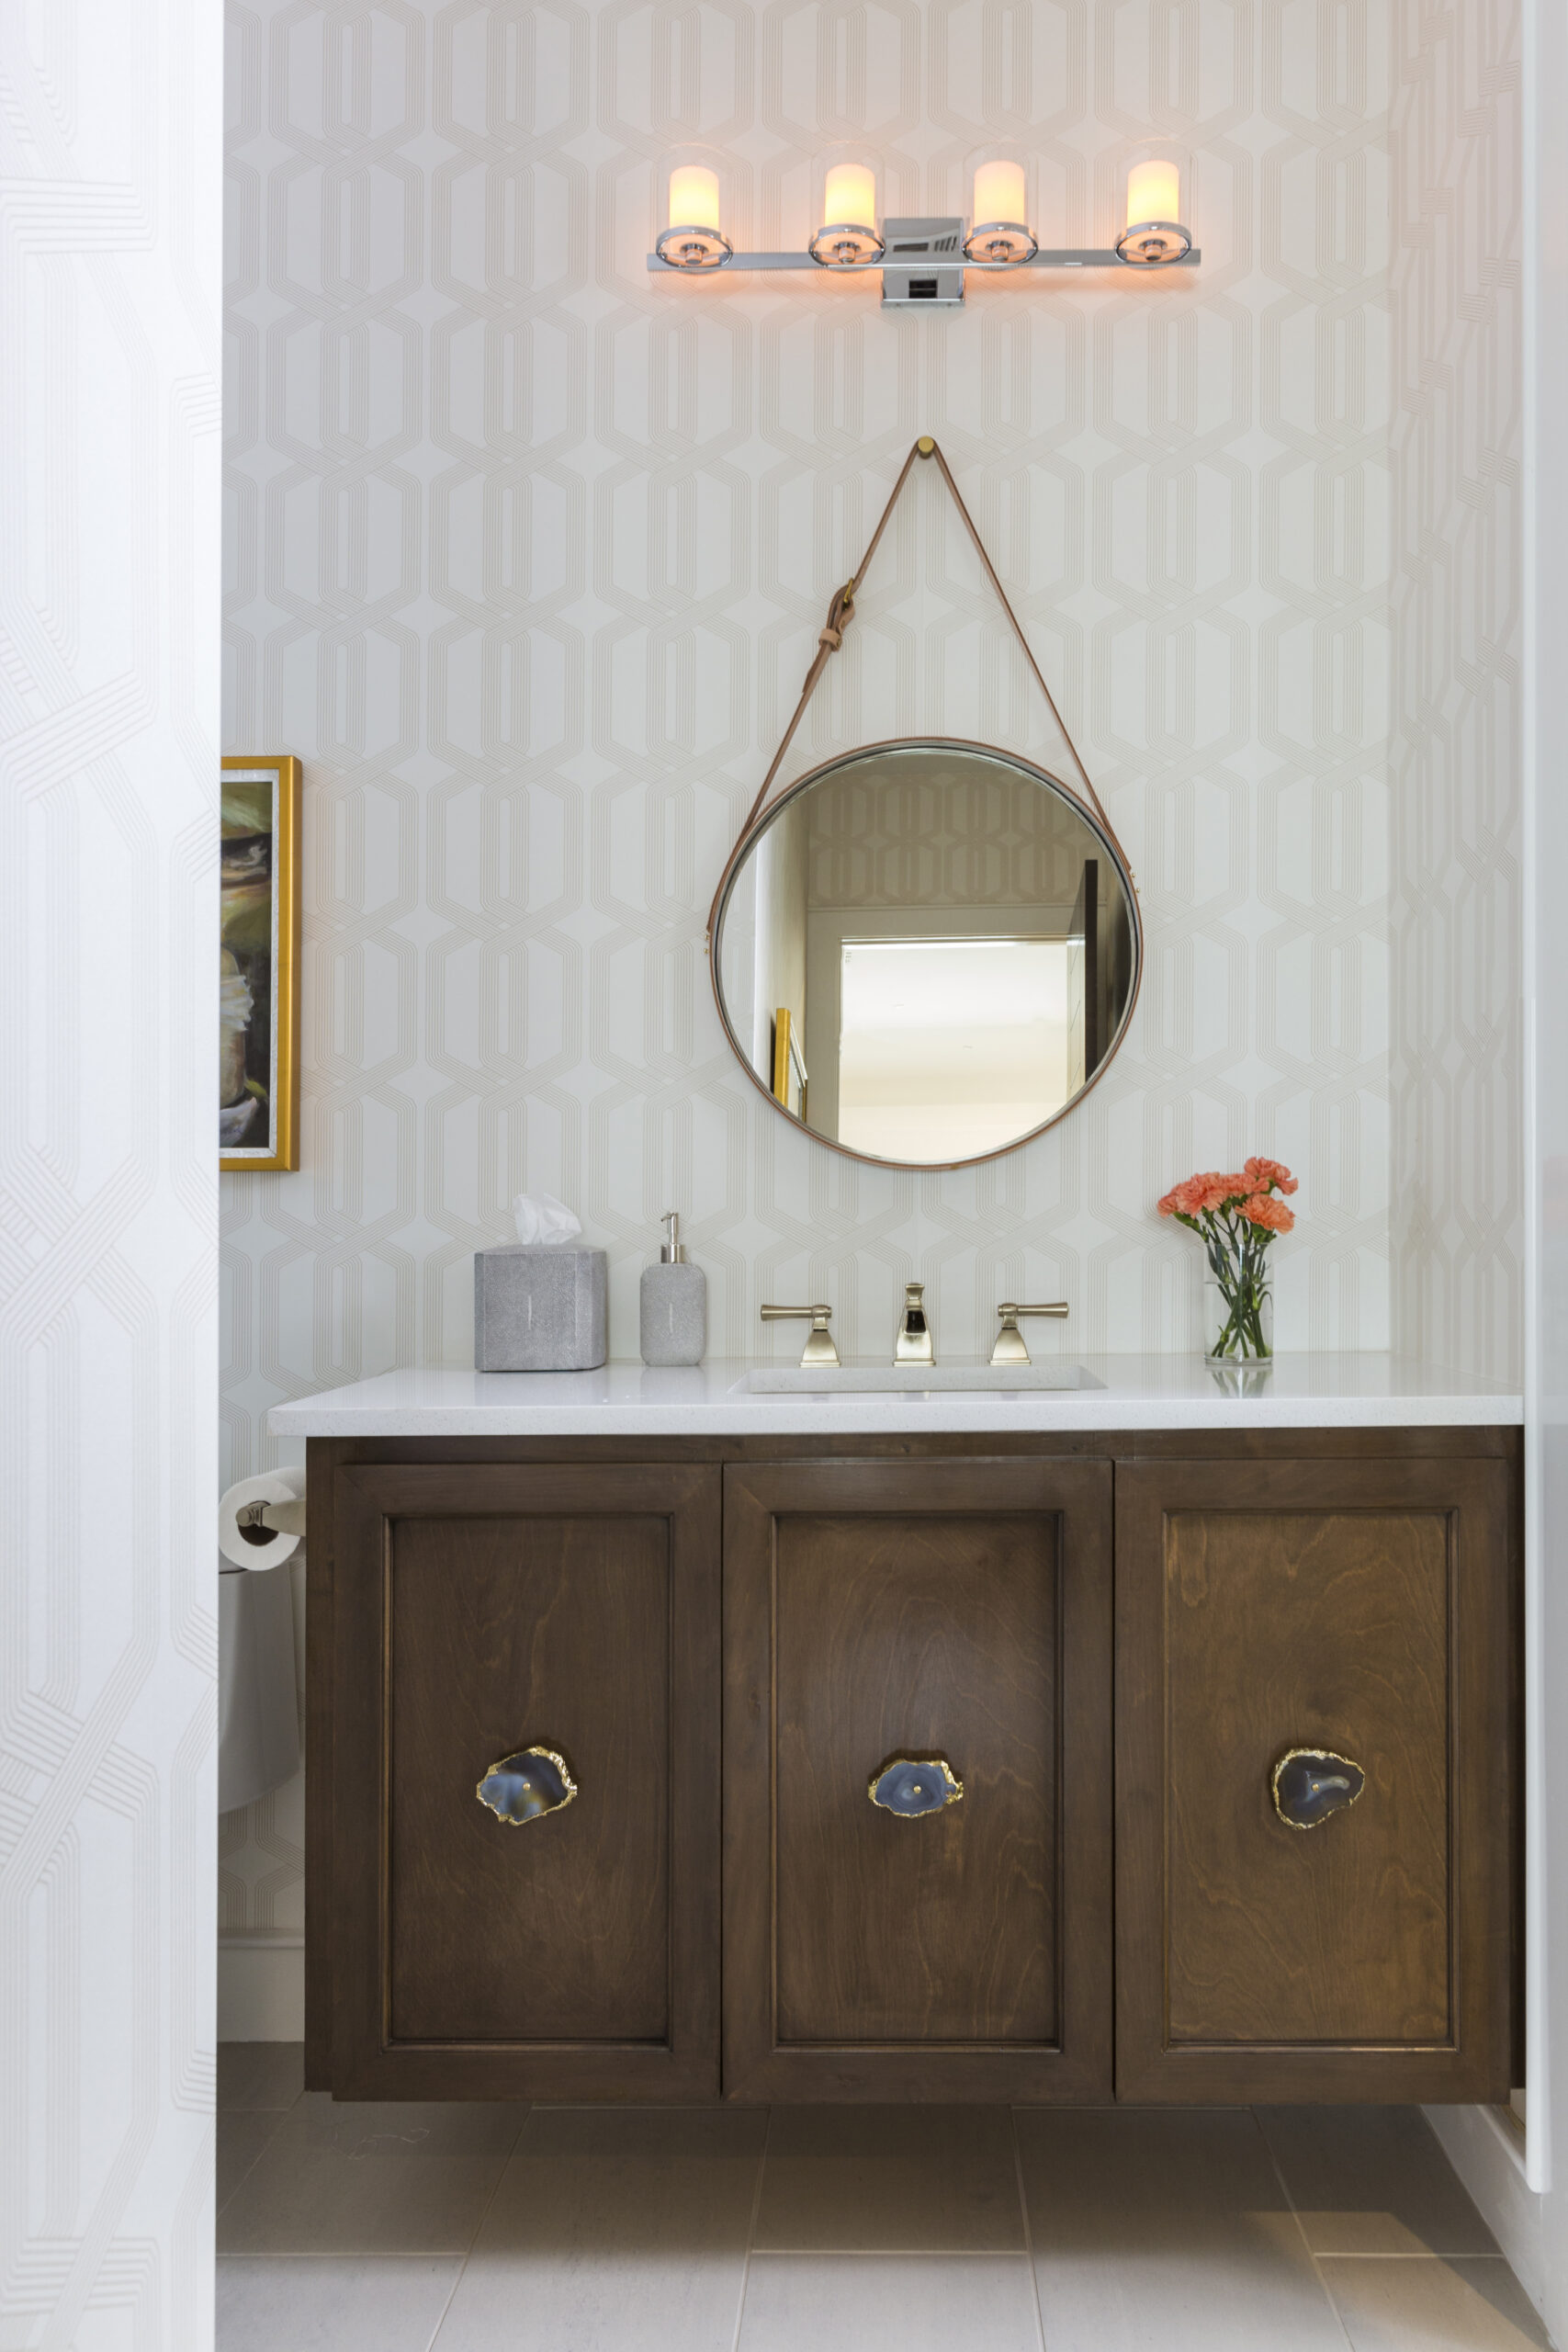 Stunning hanging round mirror in an airy and neutral bathroom. 